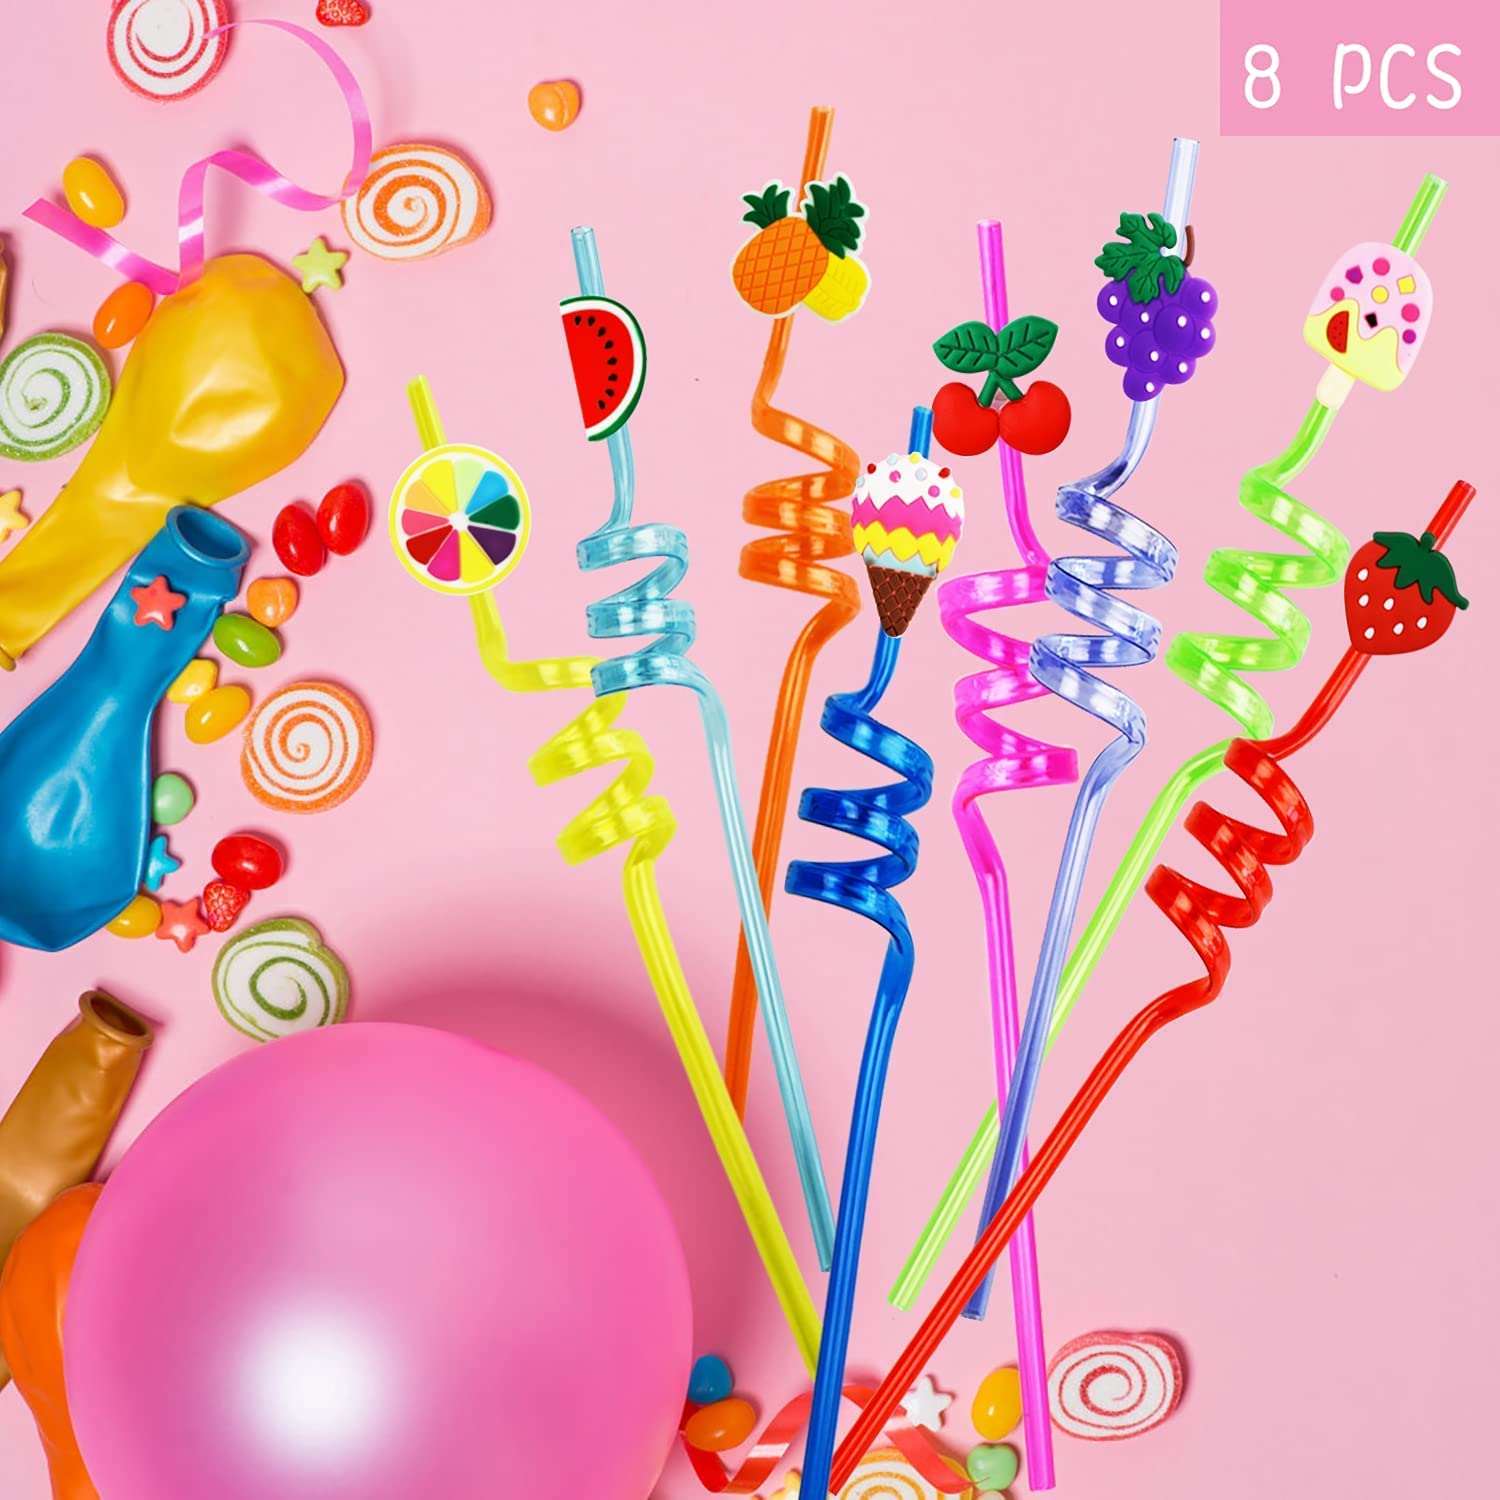 AZi Toys 4 Pieces Reusable Drinking Straws Plastic Novelty Straws Colorful Curly Straws for Kids Birthday Party Favors Family Party Decorations Supplies | Multi Color | Multi Attachments